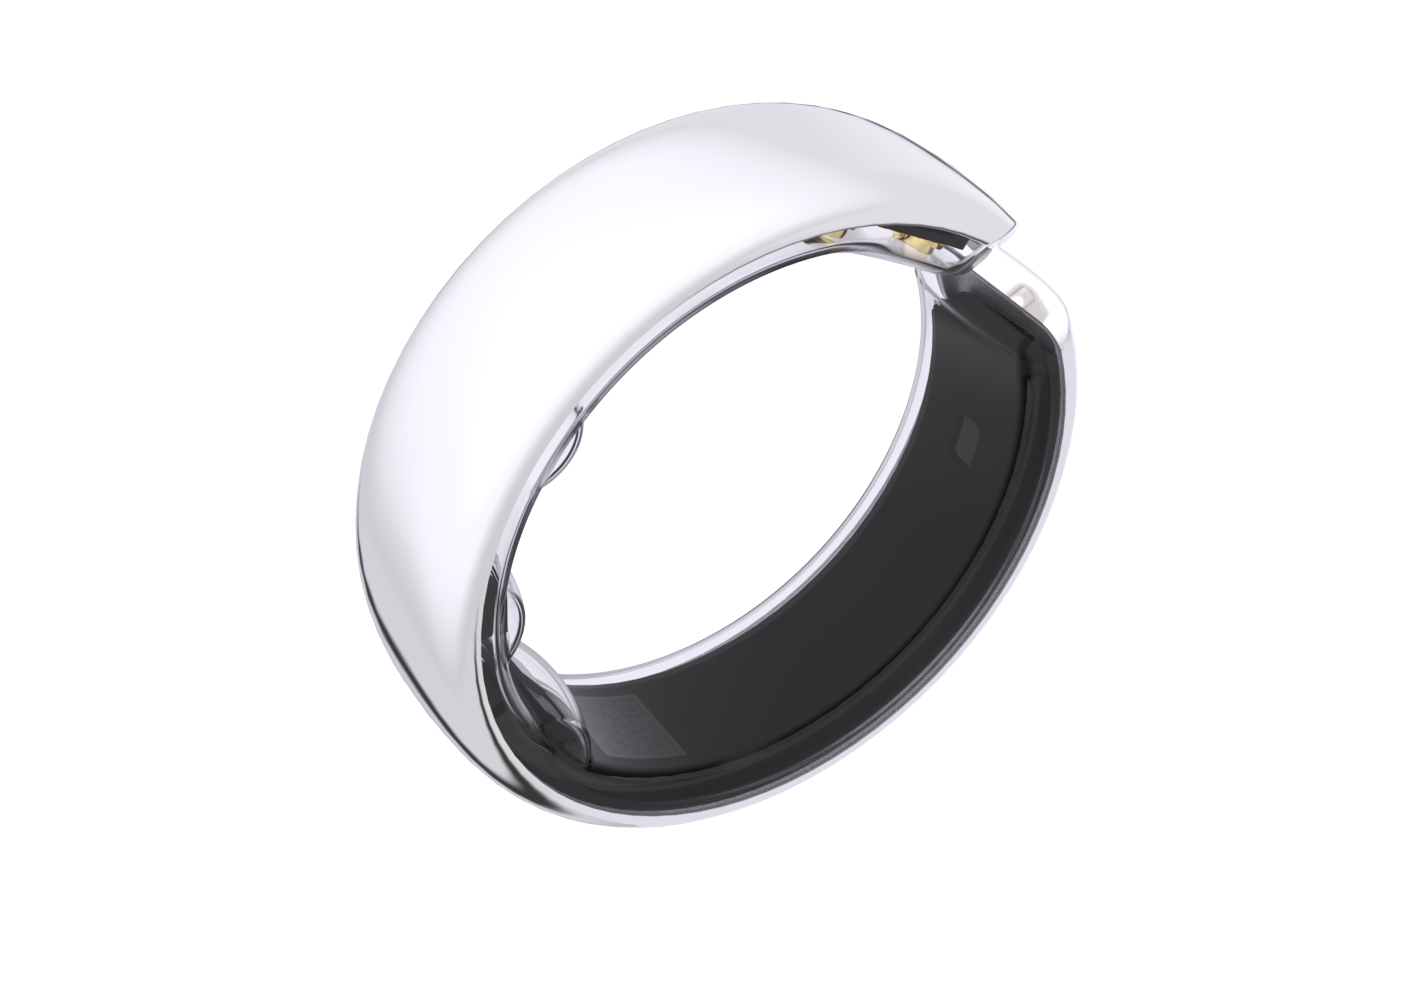 Ring One : The most advanced Smart Ring for you